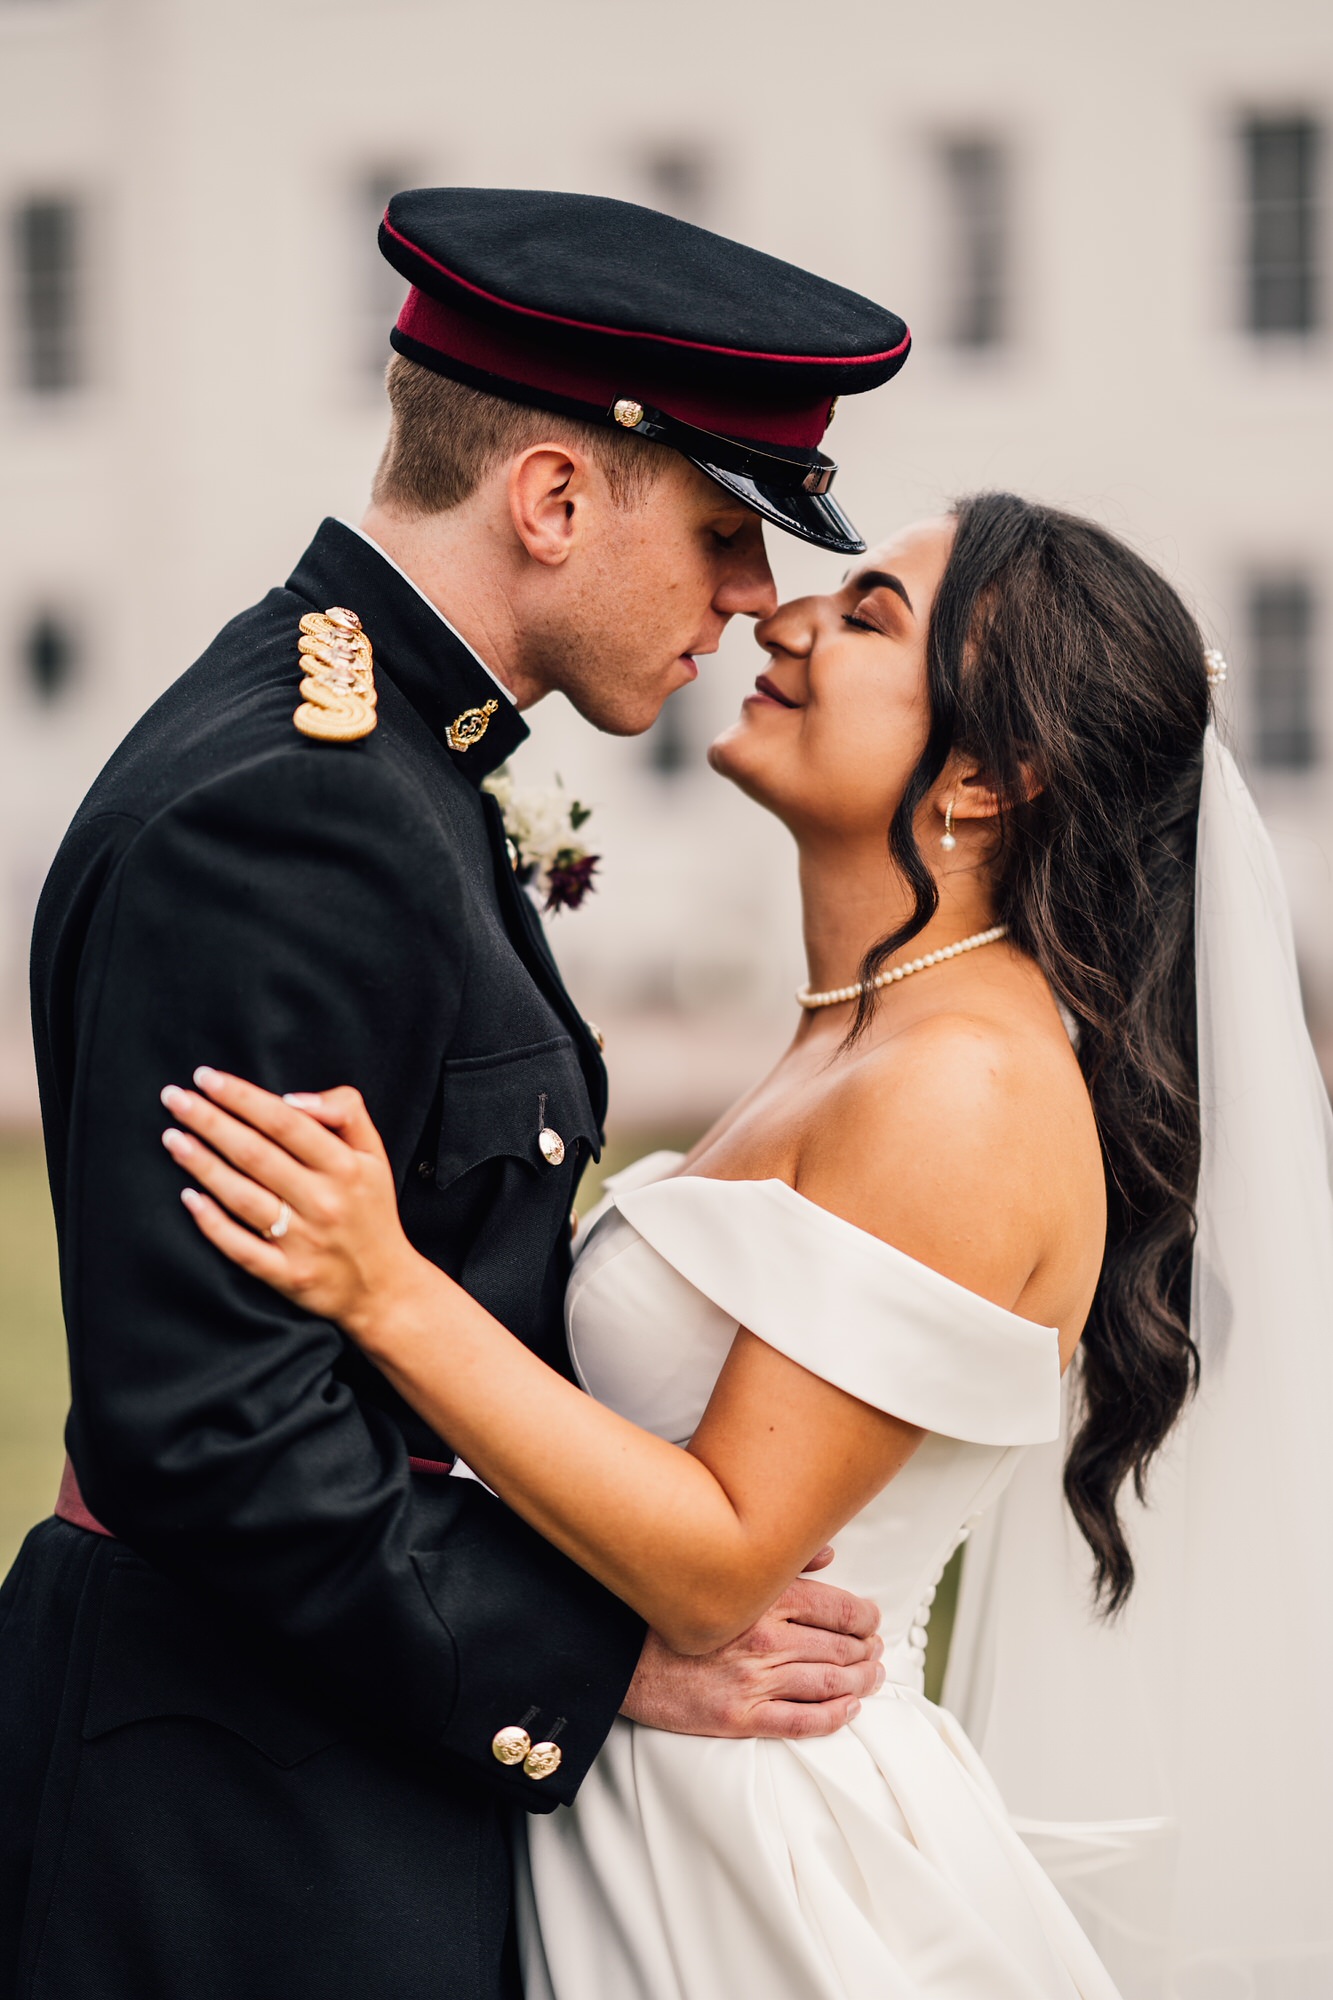 Romantic portrait of bride and groom kissing